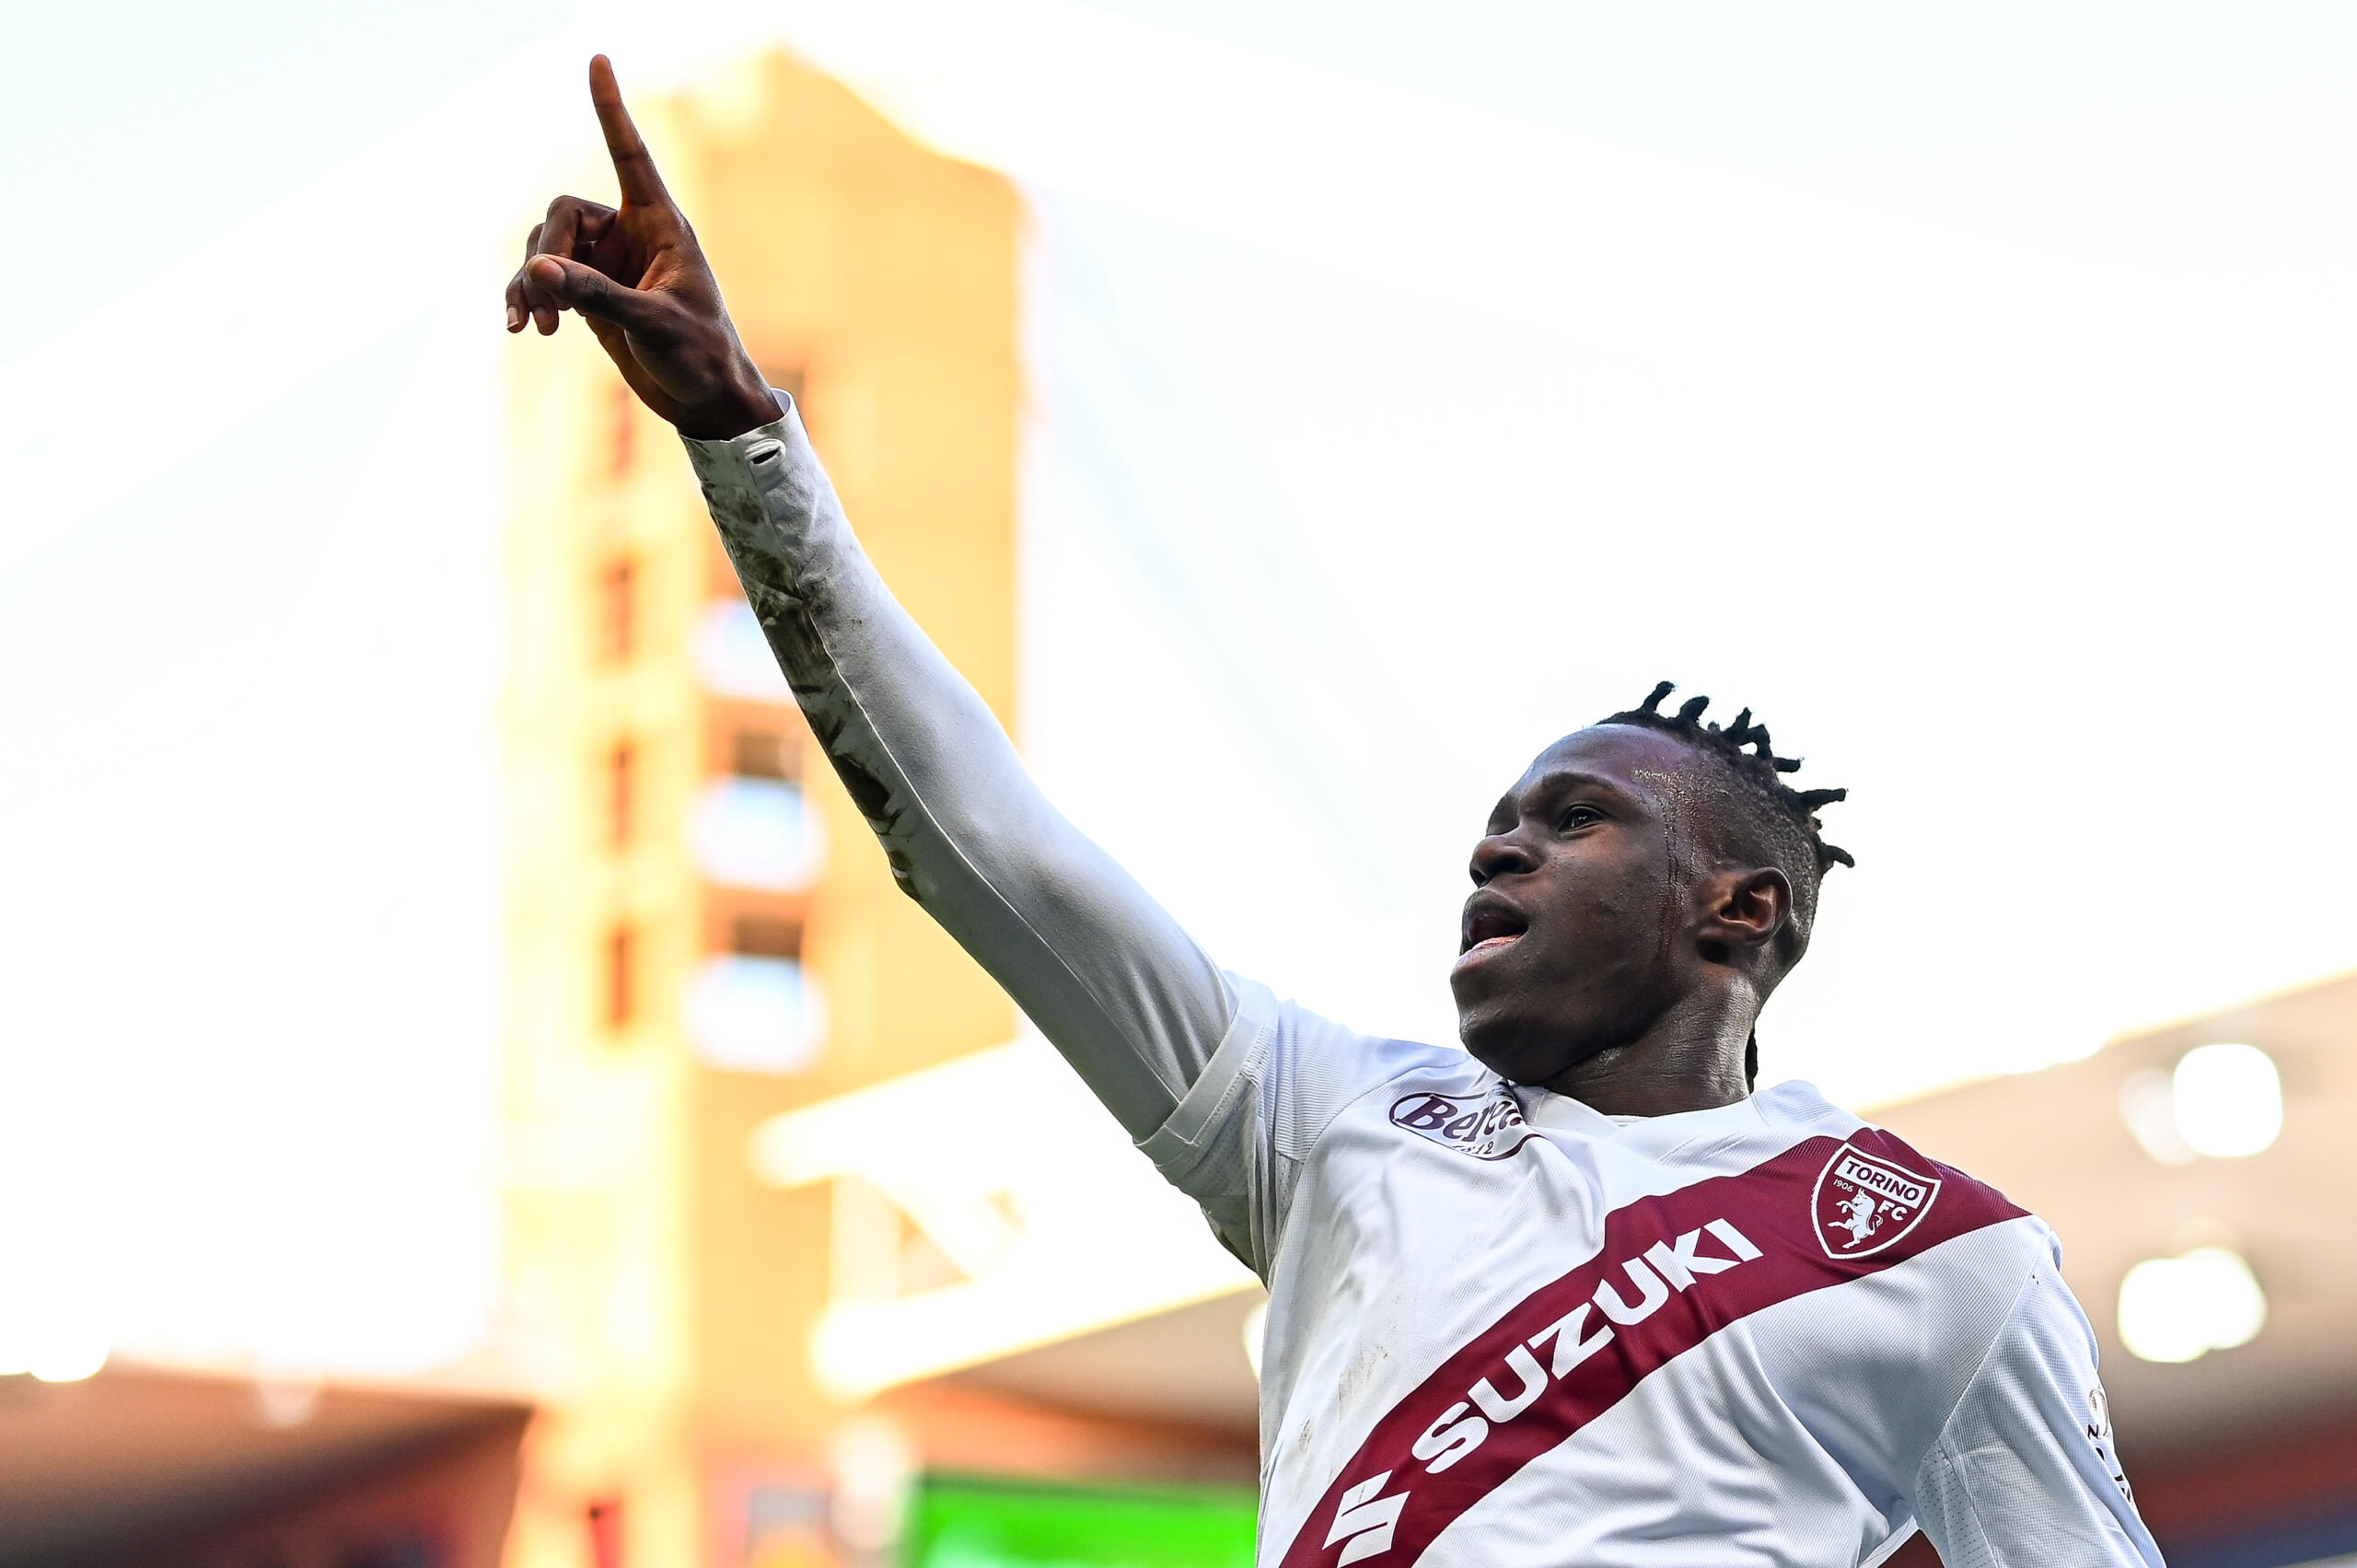 Milan are interested in Wilfried Singo to bolster their right wing. CEO Giorgio Furlani touched base with Torino to learn about the conditions of the deal.